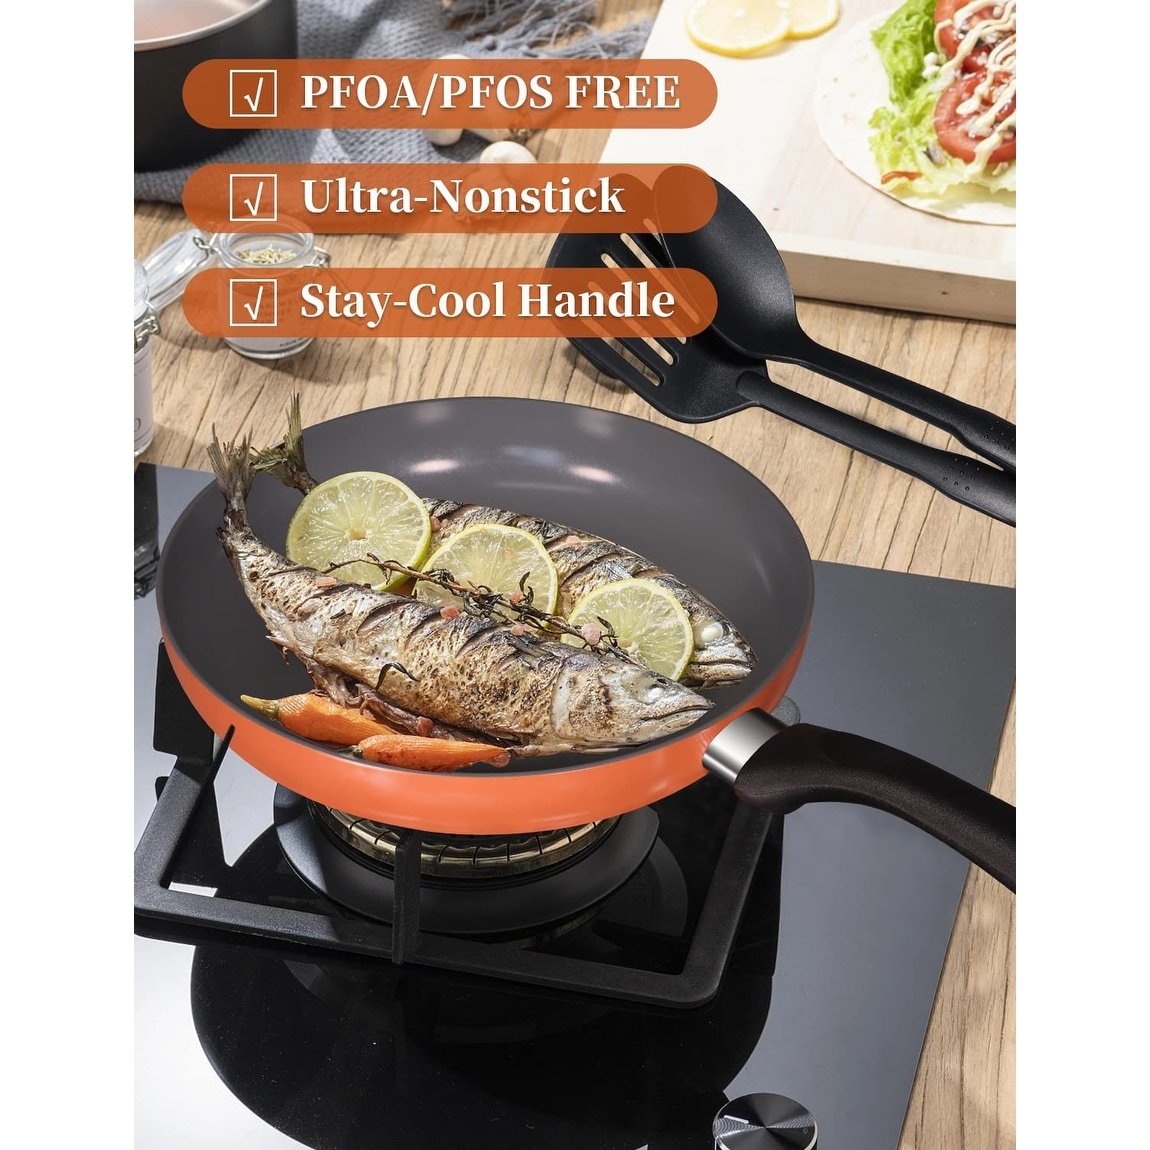 https://ak1.ostkcdn.com/images/products/is/images/direct/c91ed12c123a7c92c06c0280ffd9b56d5b91dd78/12-Piece-Nonstick-Pots-and-Pans-Sets%2CKitchen-Cookware-with-Ceramic-Coating%2CDishwasher-Safe%2CFrying-Pan-Set-with-Lid.jpg